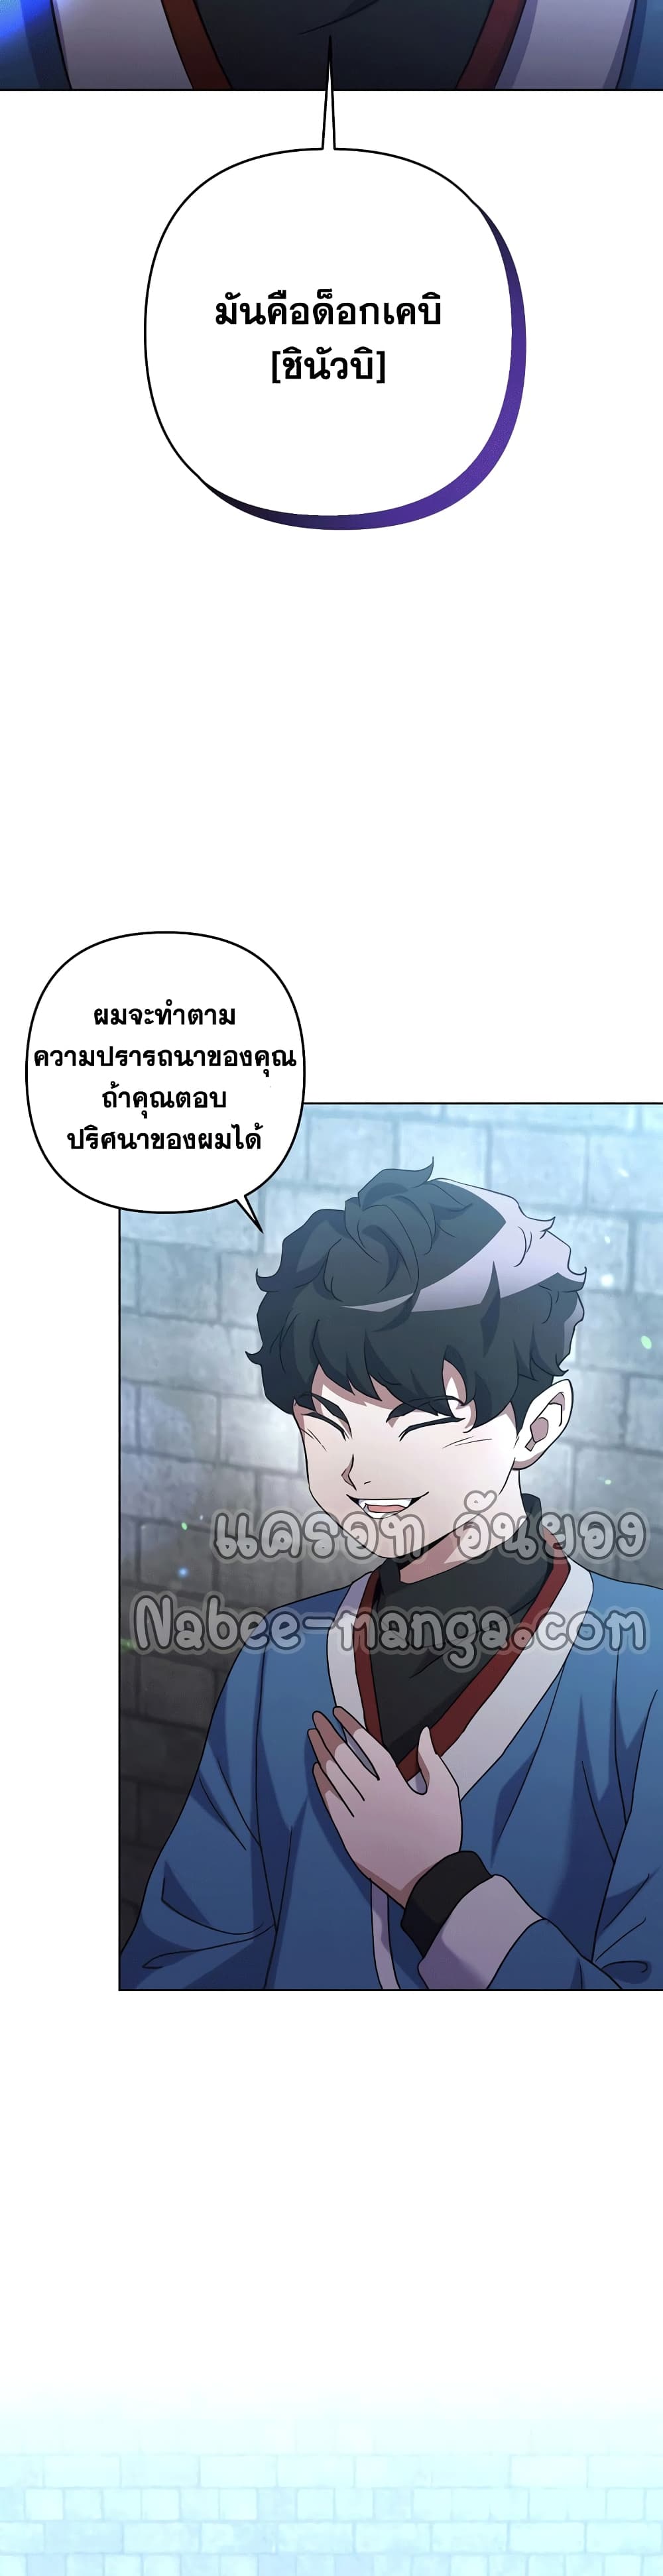 Surviving in an Action Manhwa 19-19